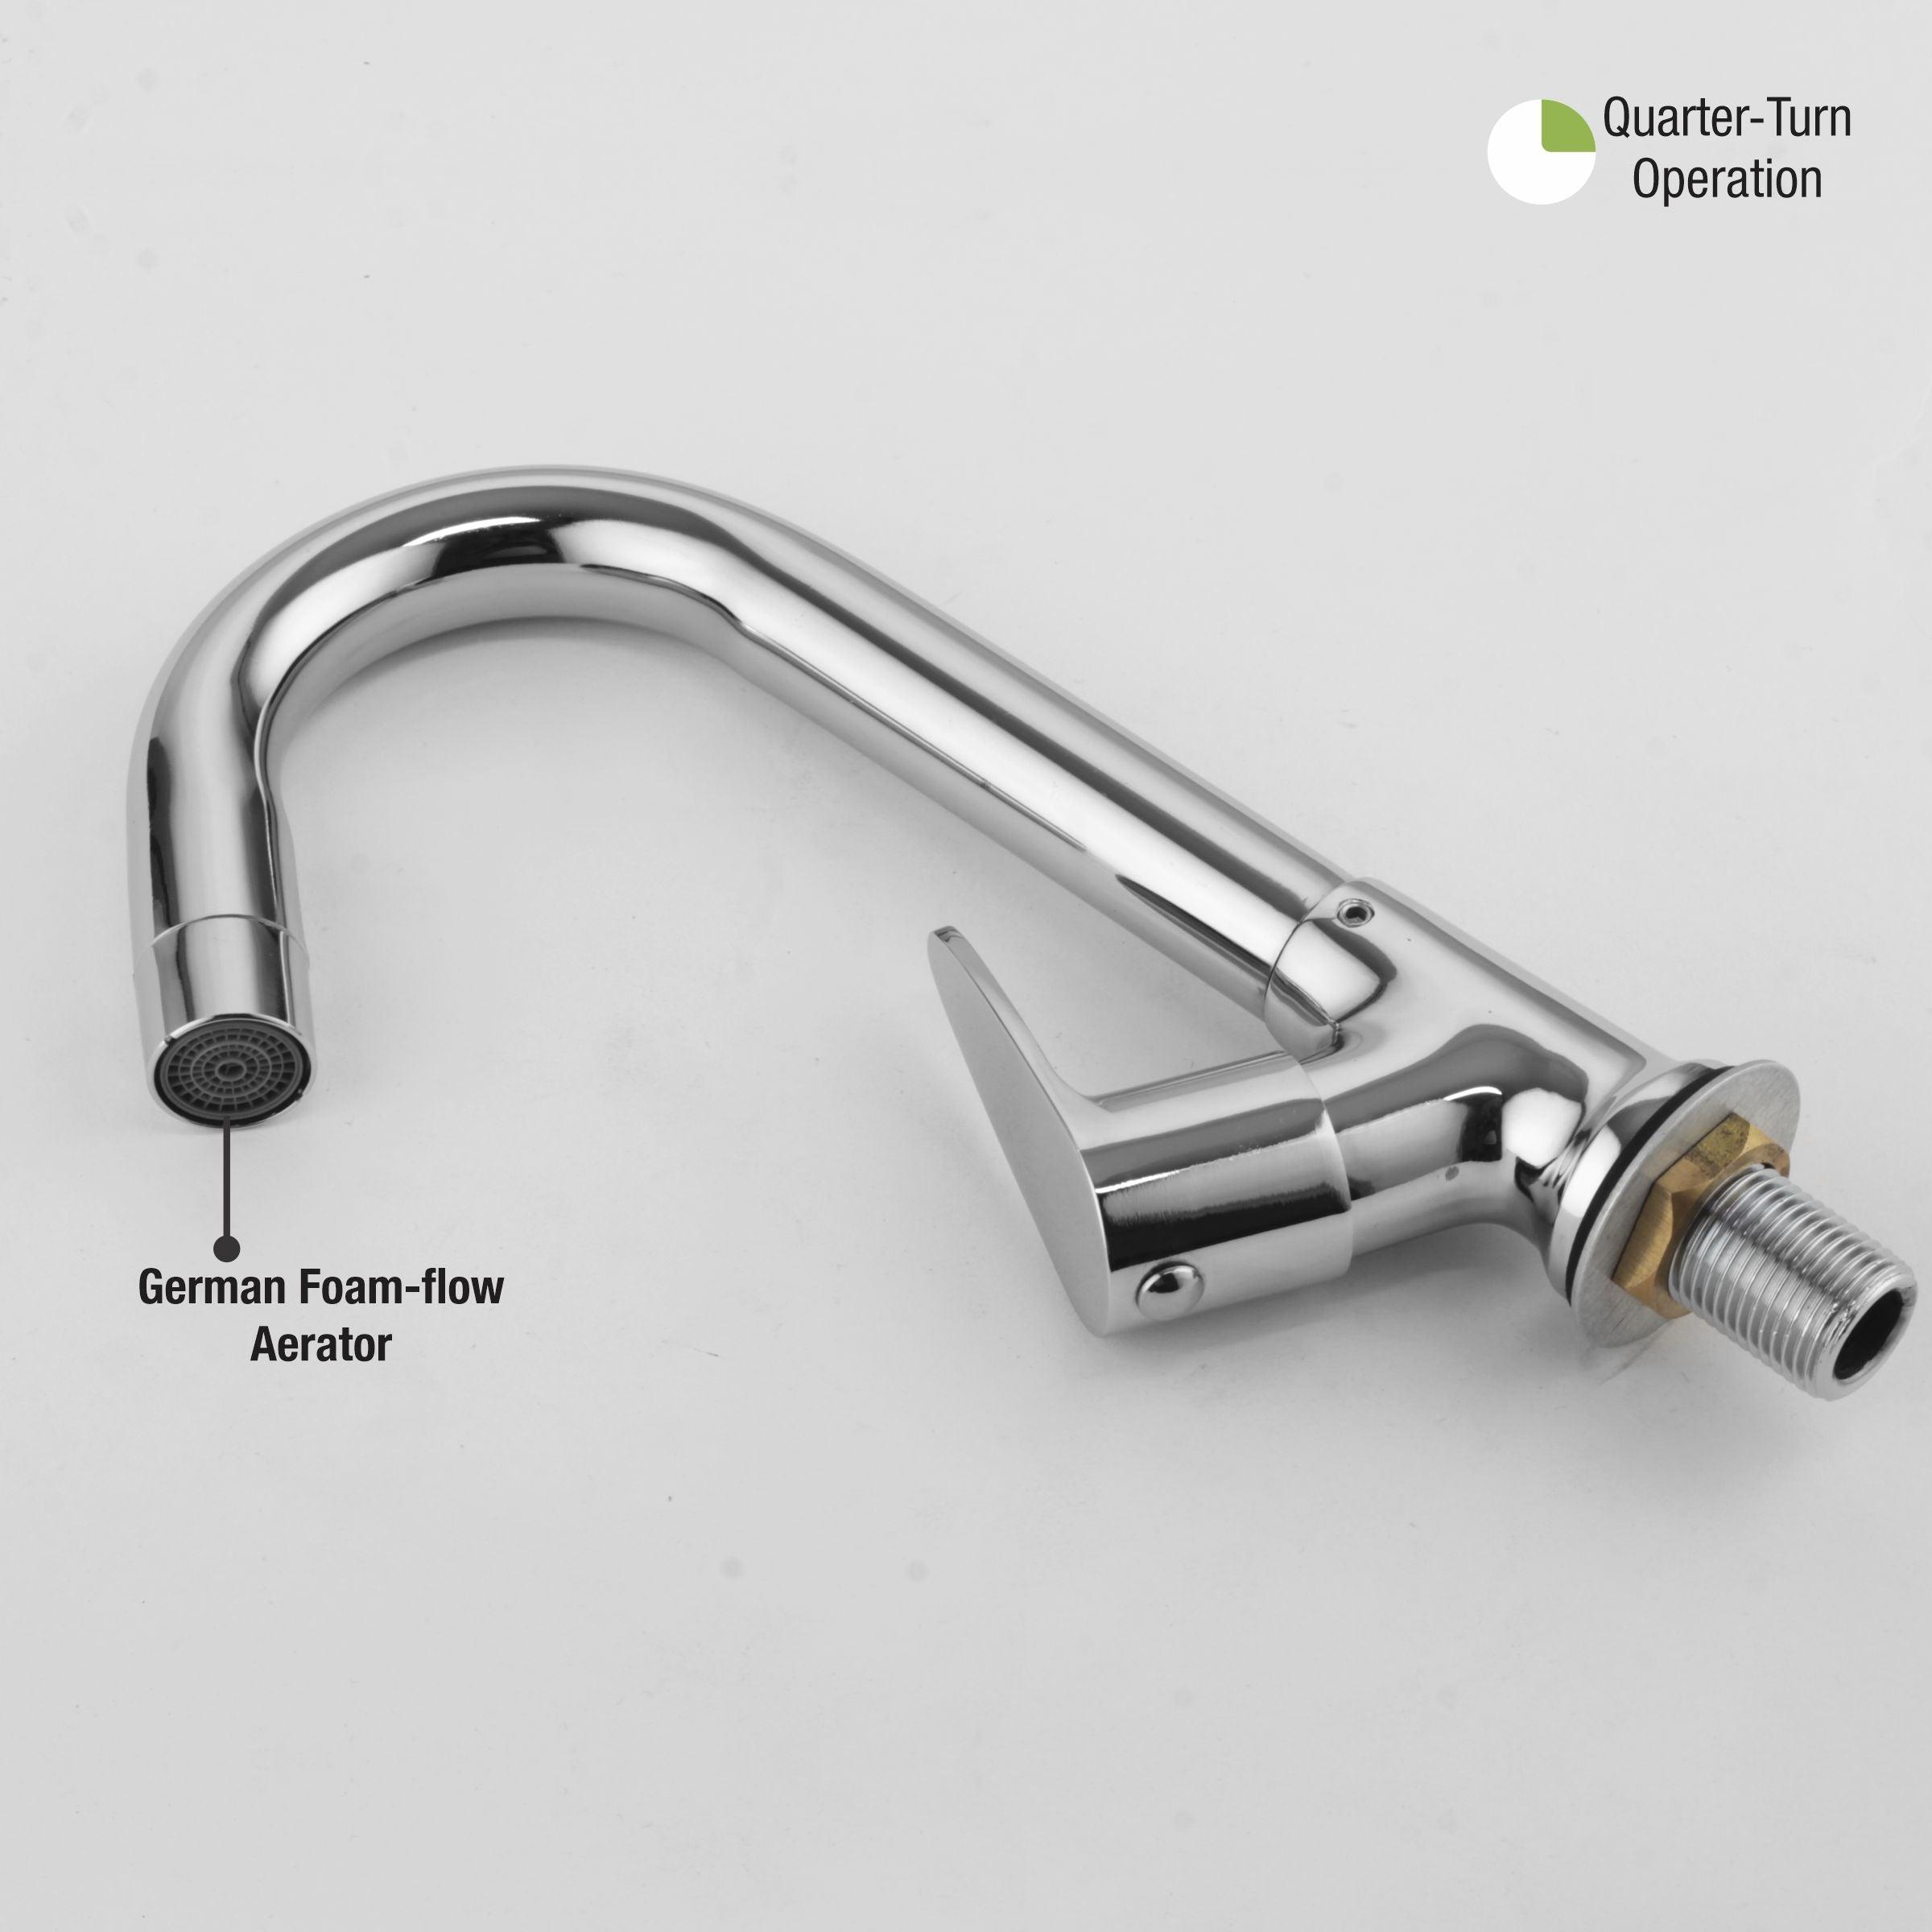 Lava Swan Neck with Swivel Spout (12 Inches) Brass Faucet - LIPKA - Lipka Home